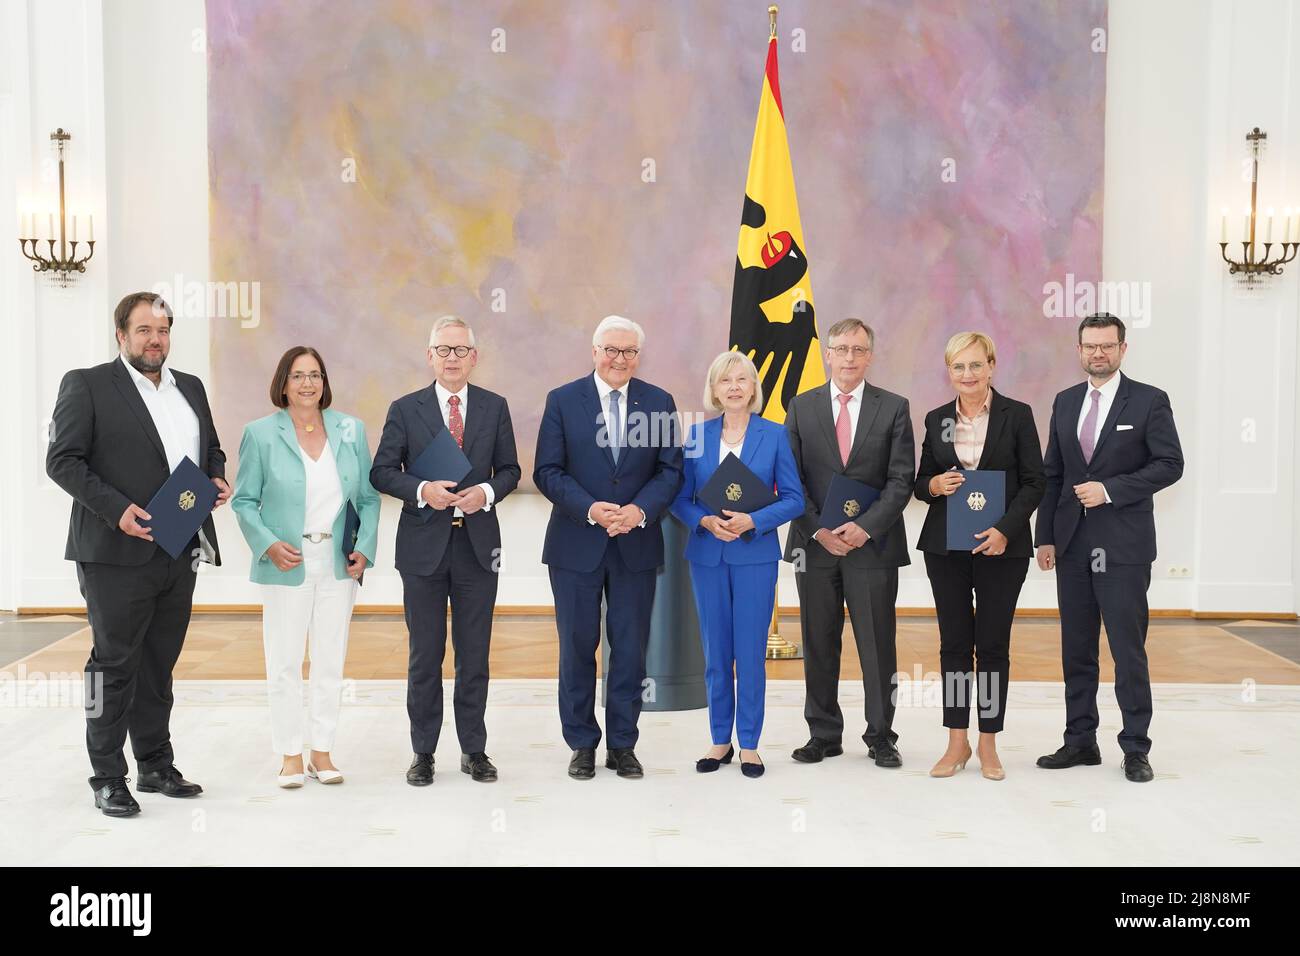 Berlin, Germany. 17th May, 2022. Federal President Frank-Walter Steinmeier (4th from right) appoints Malte Spitz (l-r), Kerstin Müller, Lutz Goebel, Gudrun Grieser, Reinhard Göhner and Andrea Wicklein as new members of the National Standards Control Council in the presence of Marco Buschmann (r, FDP), Federal Minister of Justice, at Bellevue Palace. As an independent advisory body, the National Standards Control Council monitors the German government's efforts to reduce bureaucracy and provides support for better regulation. Credit: Joerg Carstensen/dpa/Alamy Live News Stock Photo